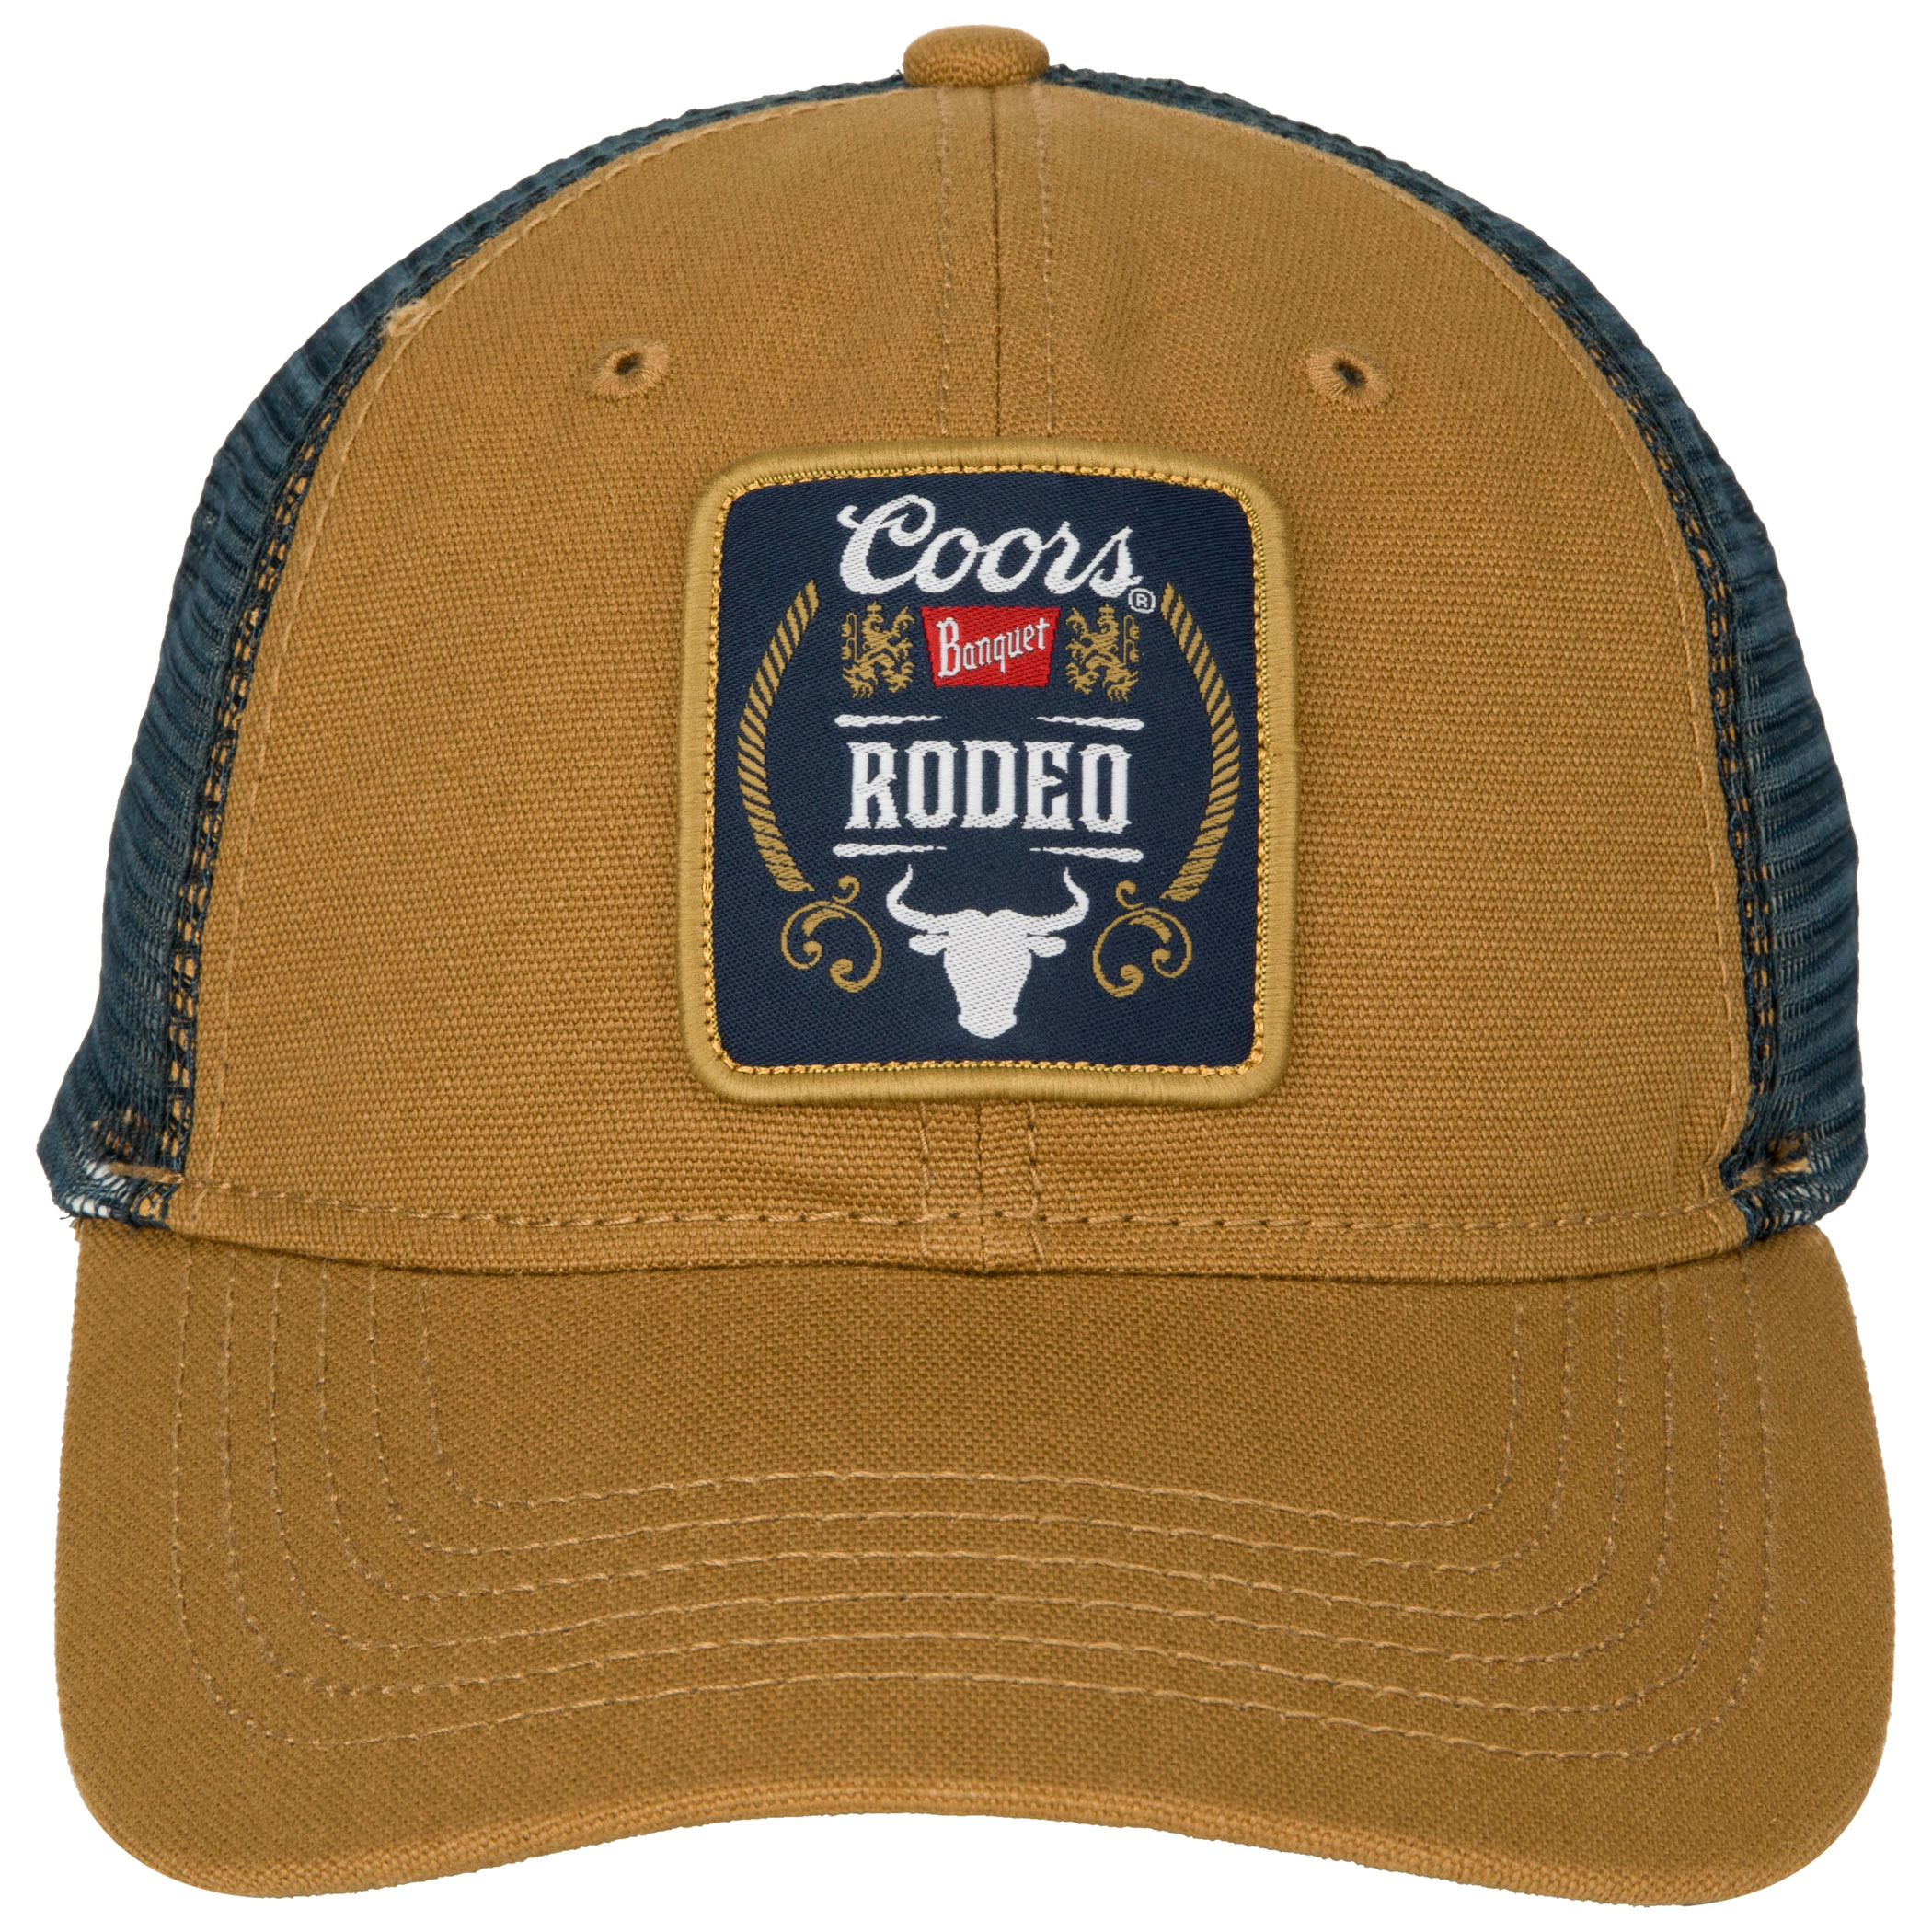 Coors Banquet Rodeo Rope Logo Canvas Snapback Hat